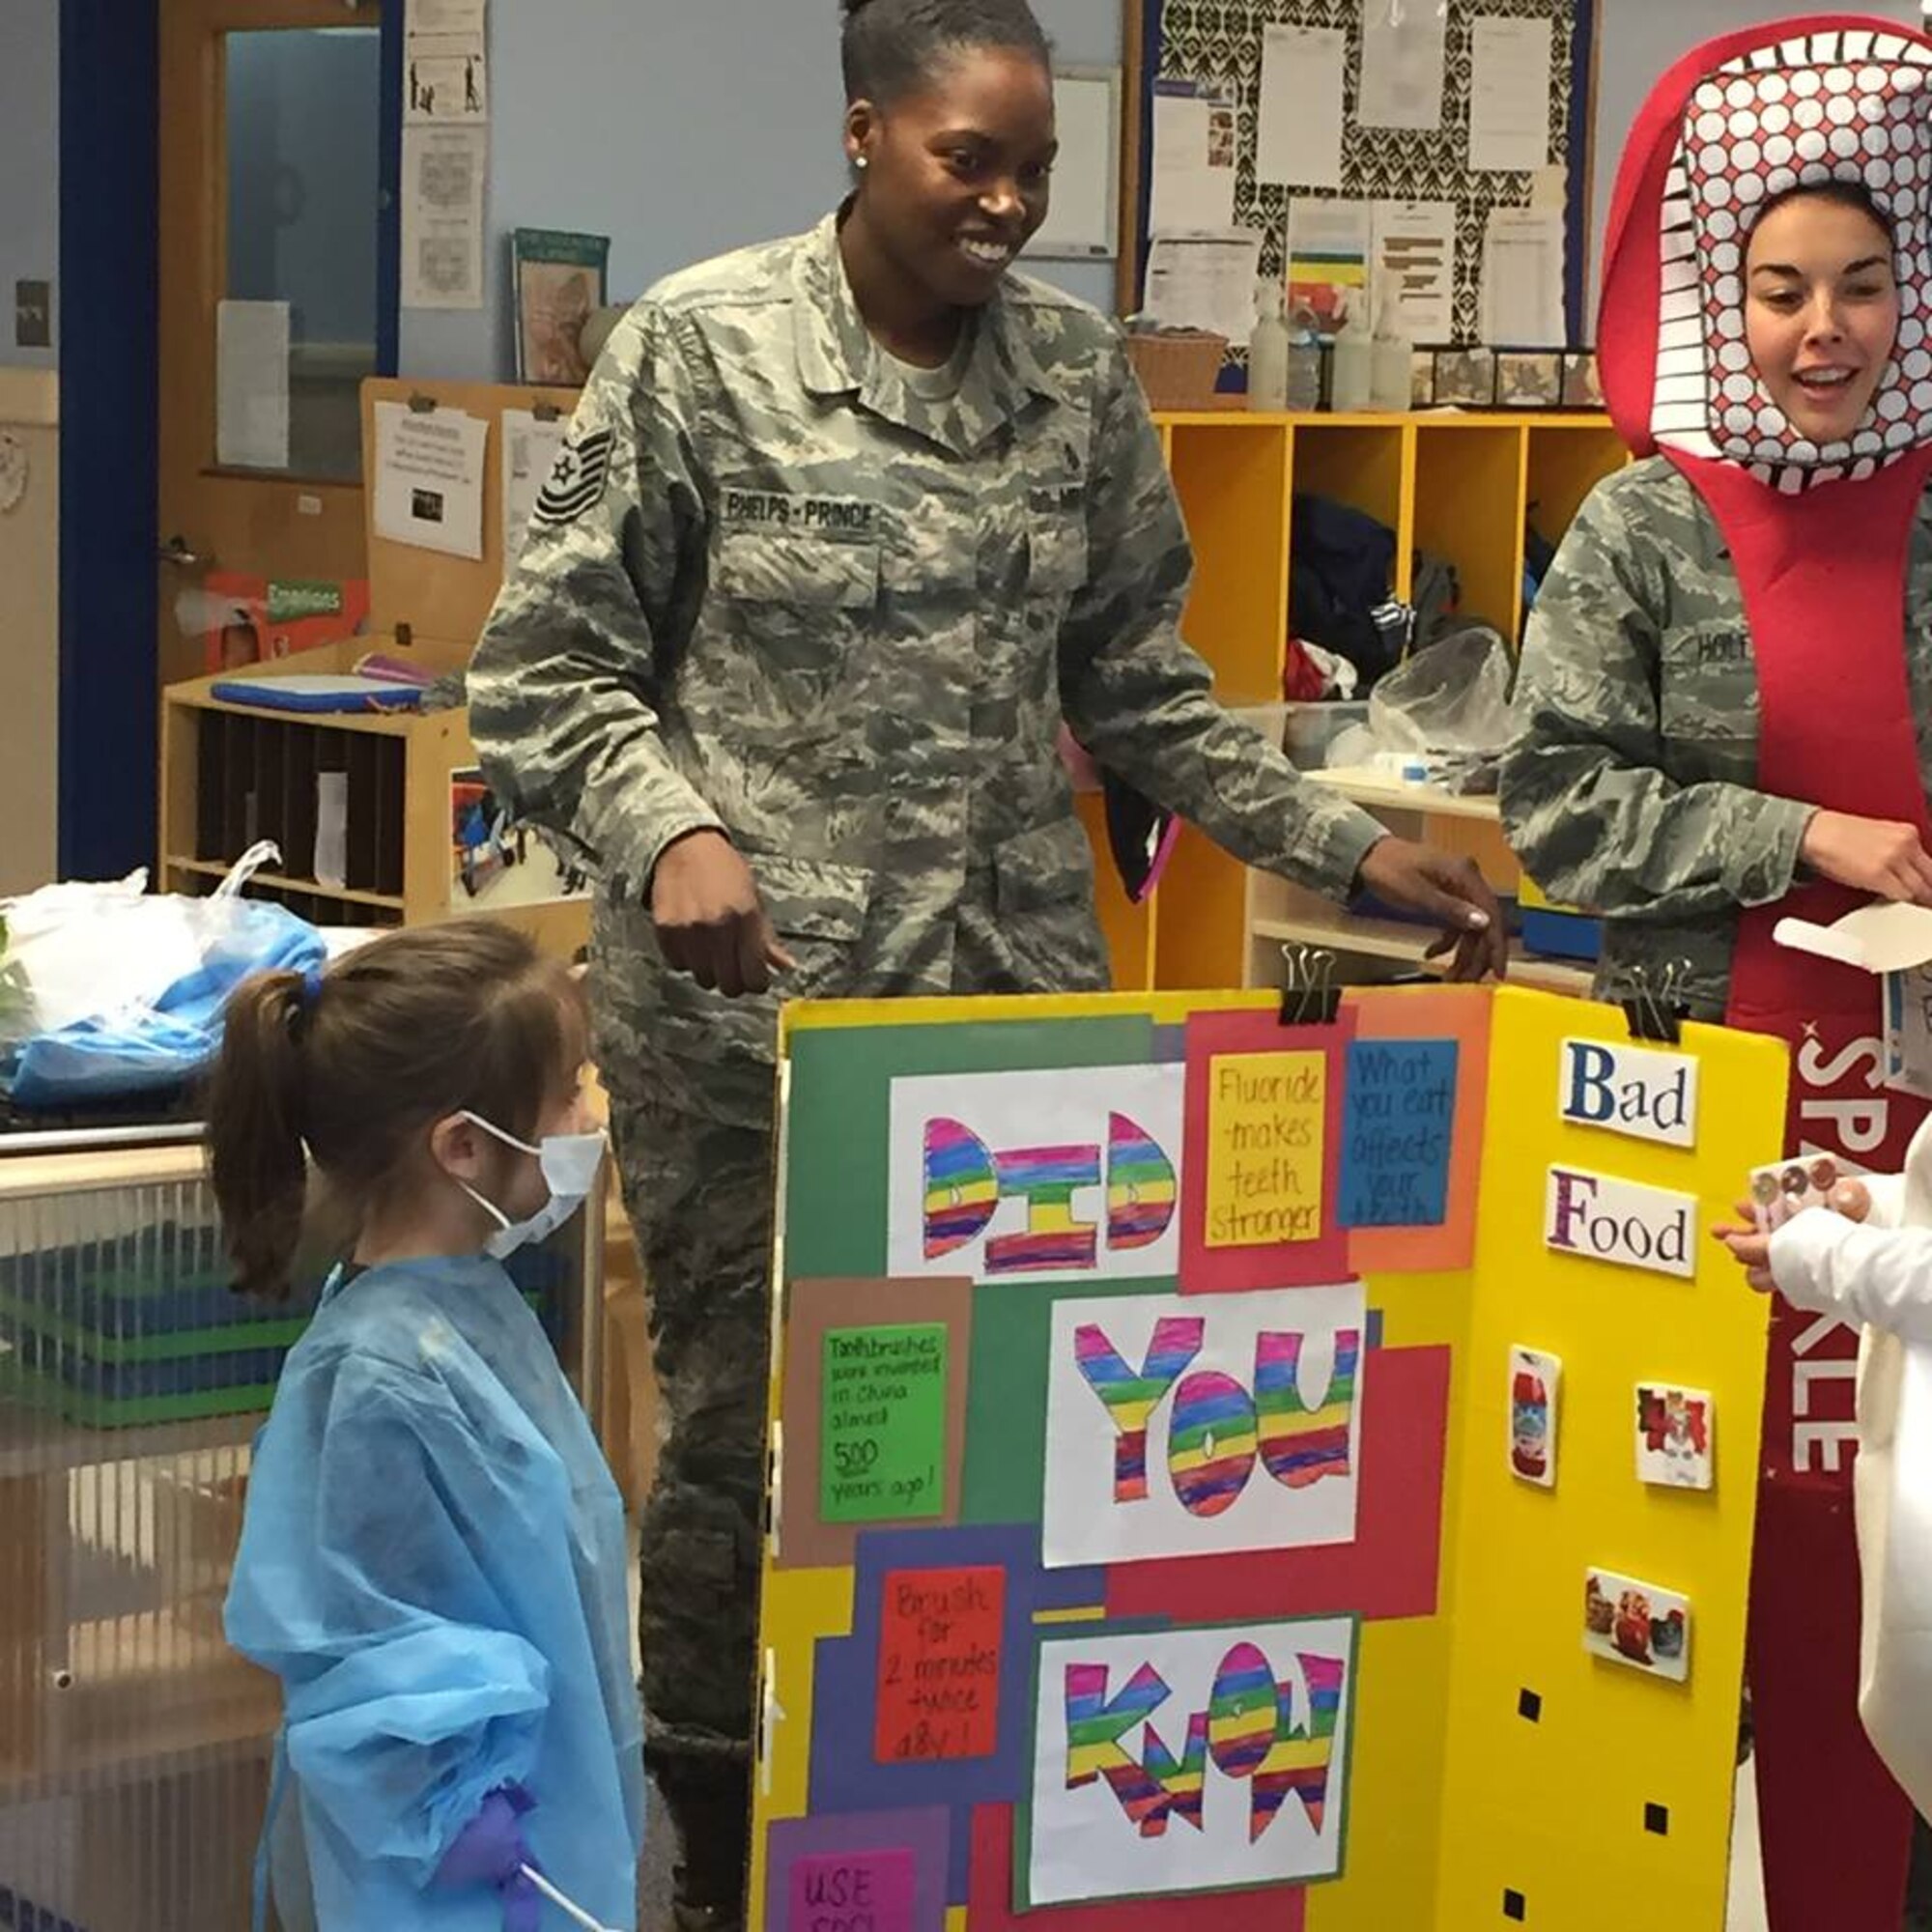 On Feb. 5, members of the Dental Squadron from the 779th Medical Group went to the Child Development Center on Joint Base Andrews to teach the kids about good dental health. They played a game to match good foods versus bad foods. (AF photo by Melanie Moore/Released)

